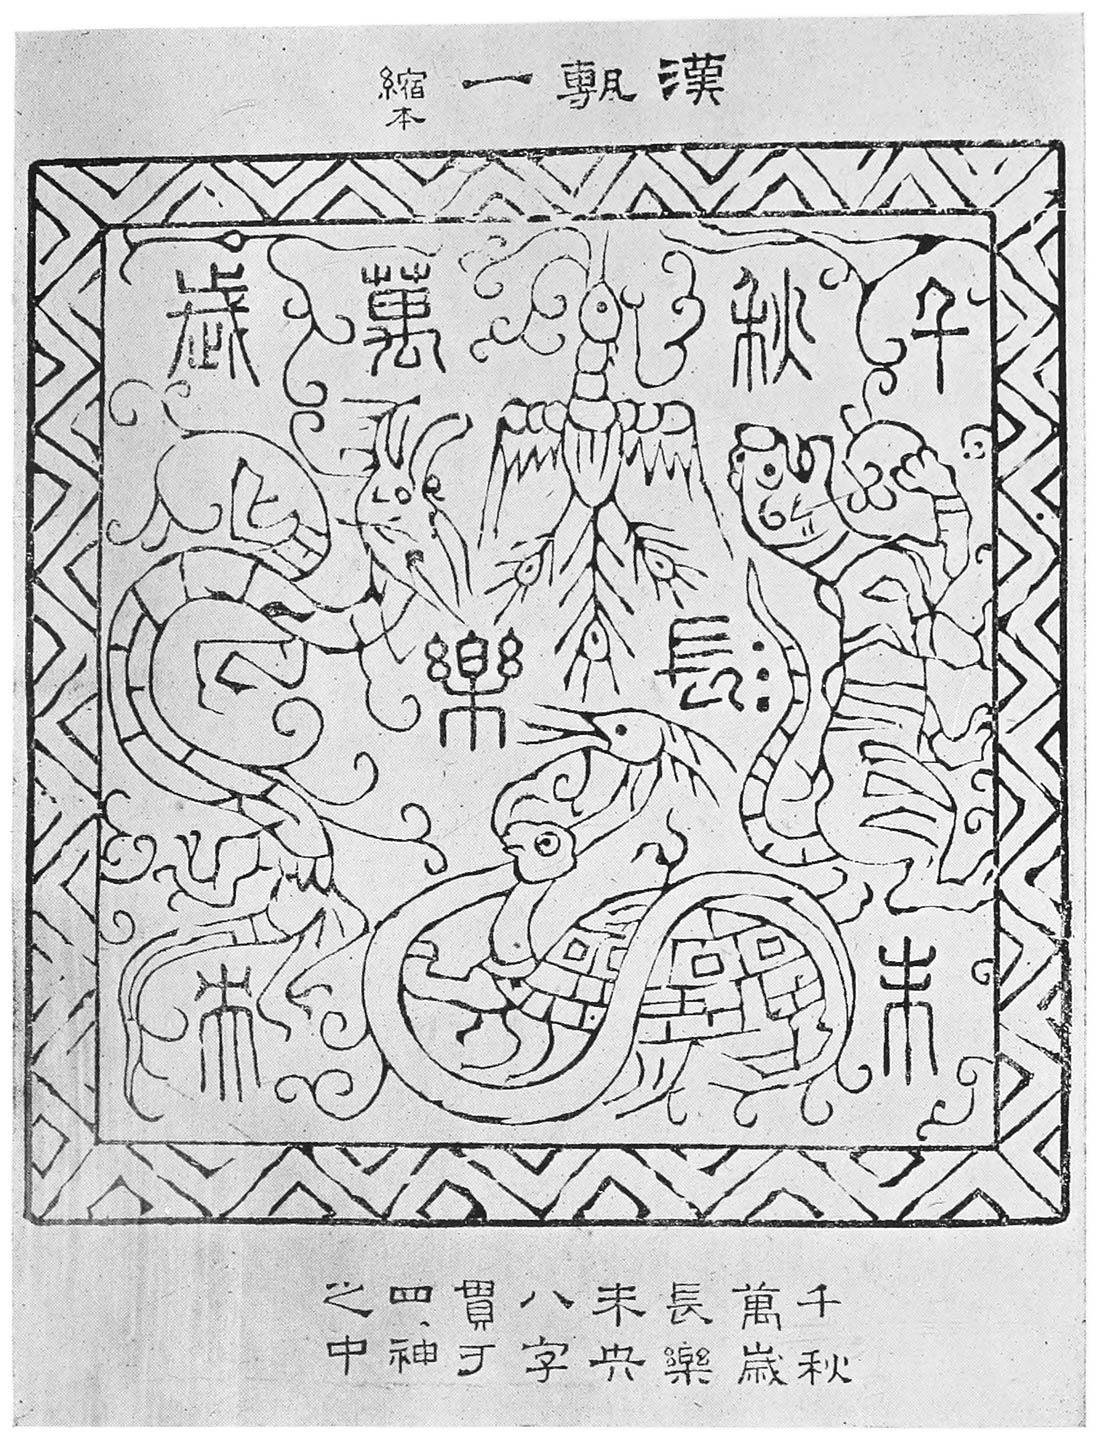 SQUARE BRICK OF THE HAN DYNASTY, WITH MYTHOLOGICAL FIGURES AND INSCRIPTIONS